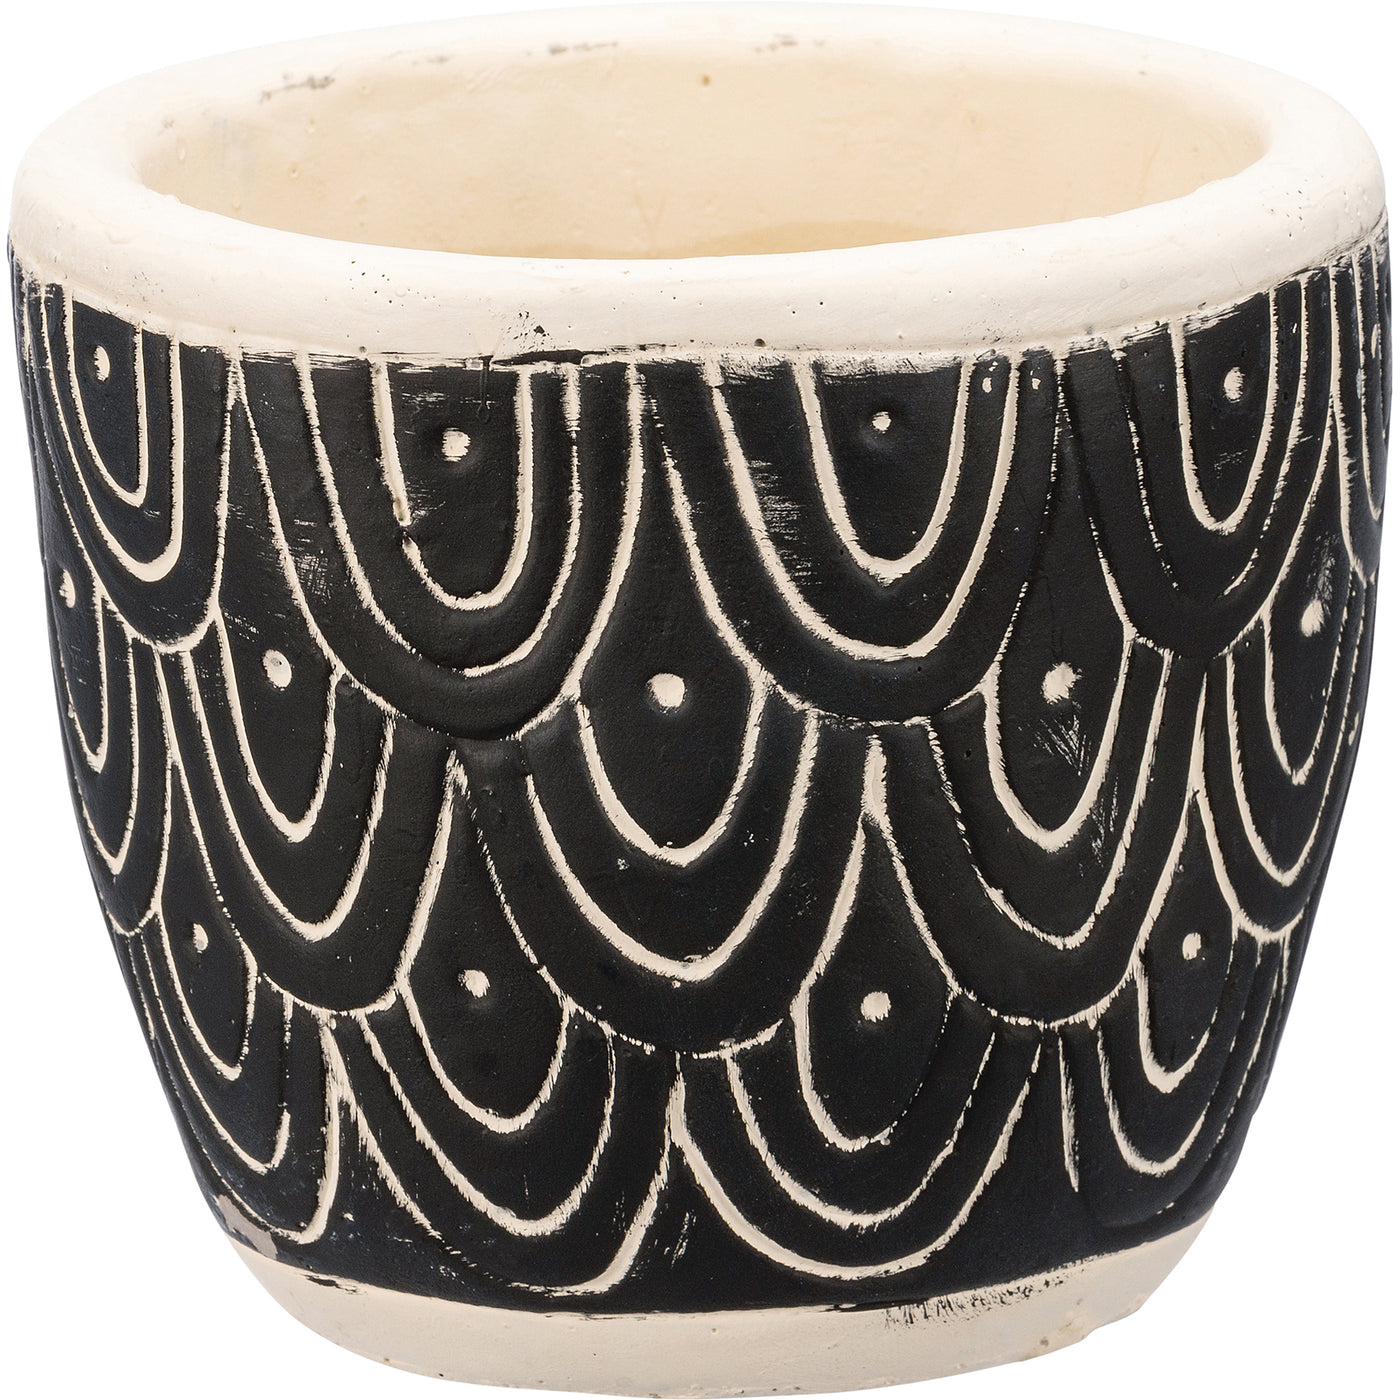 Set of 3 Geometric Patterned Black and White Planters